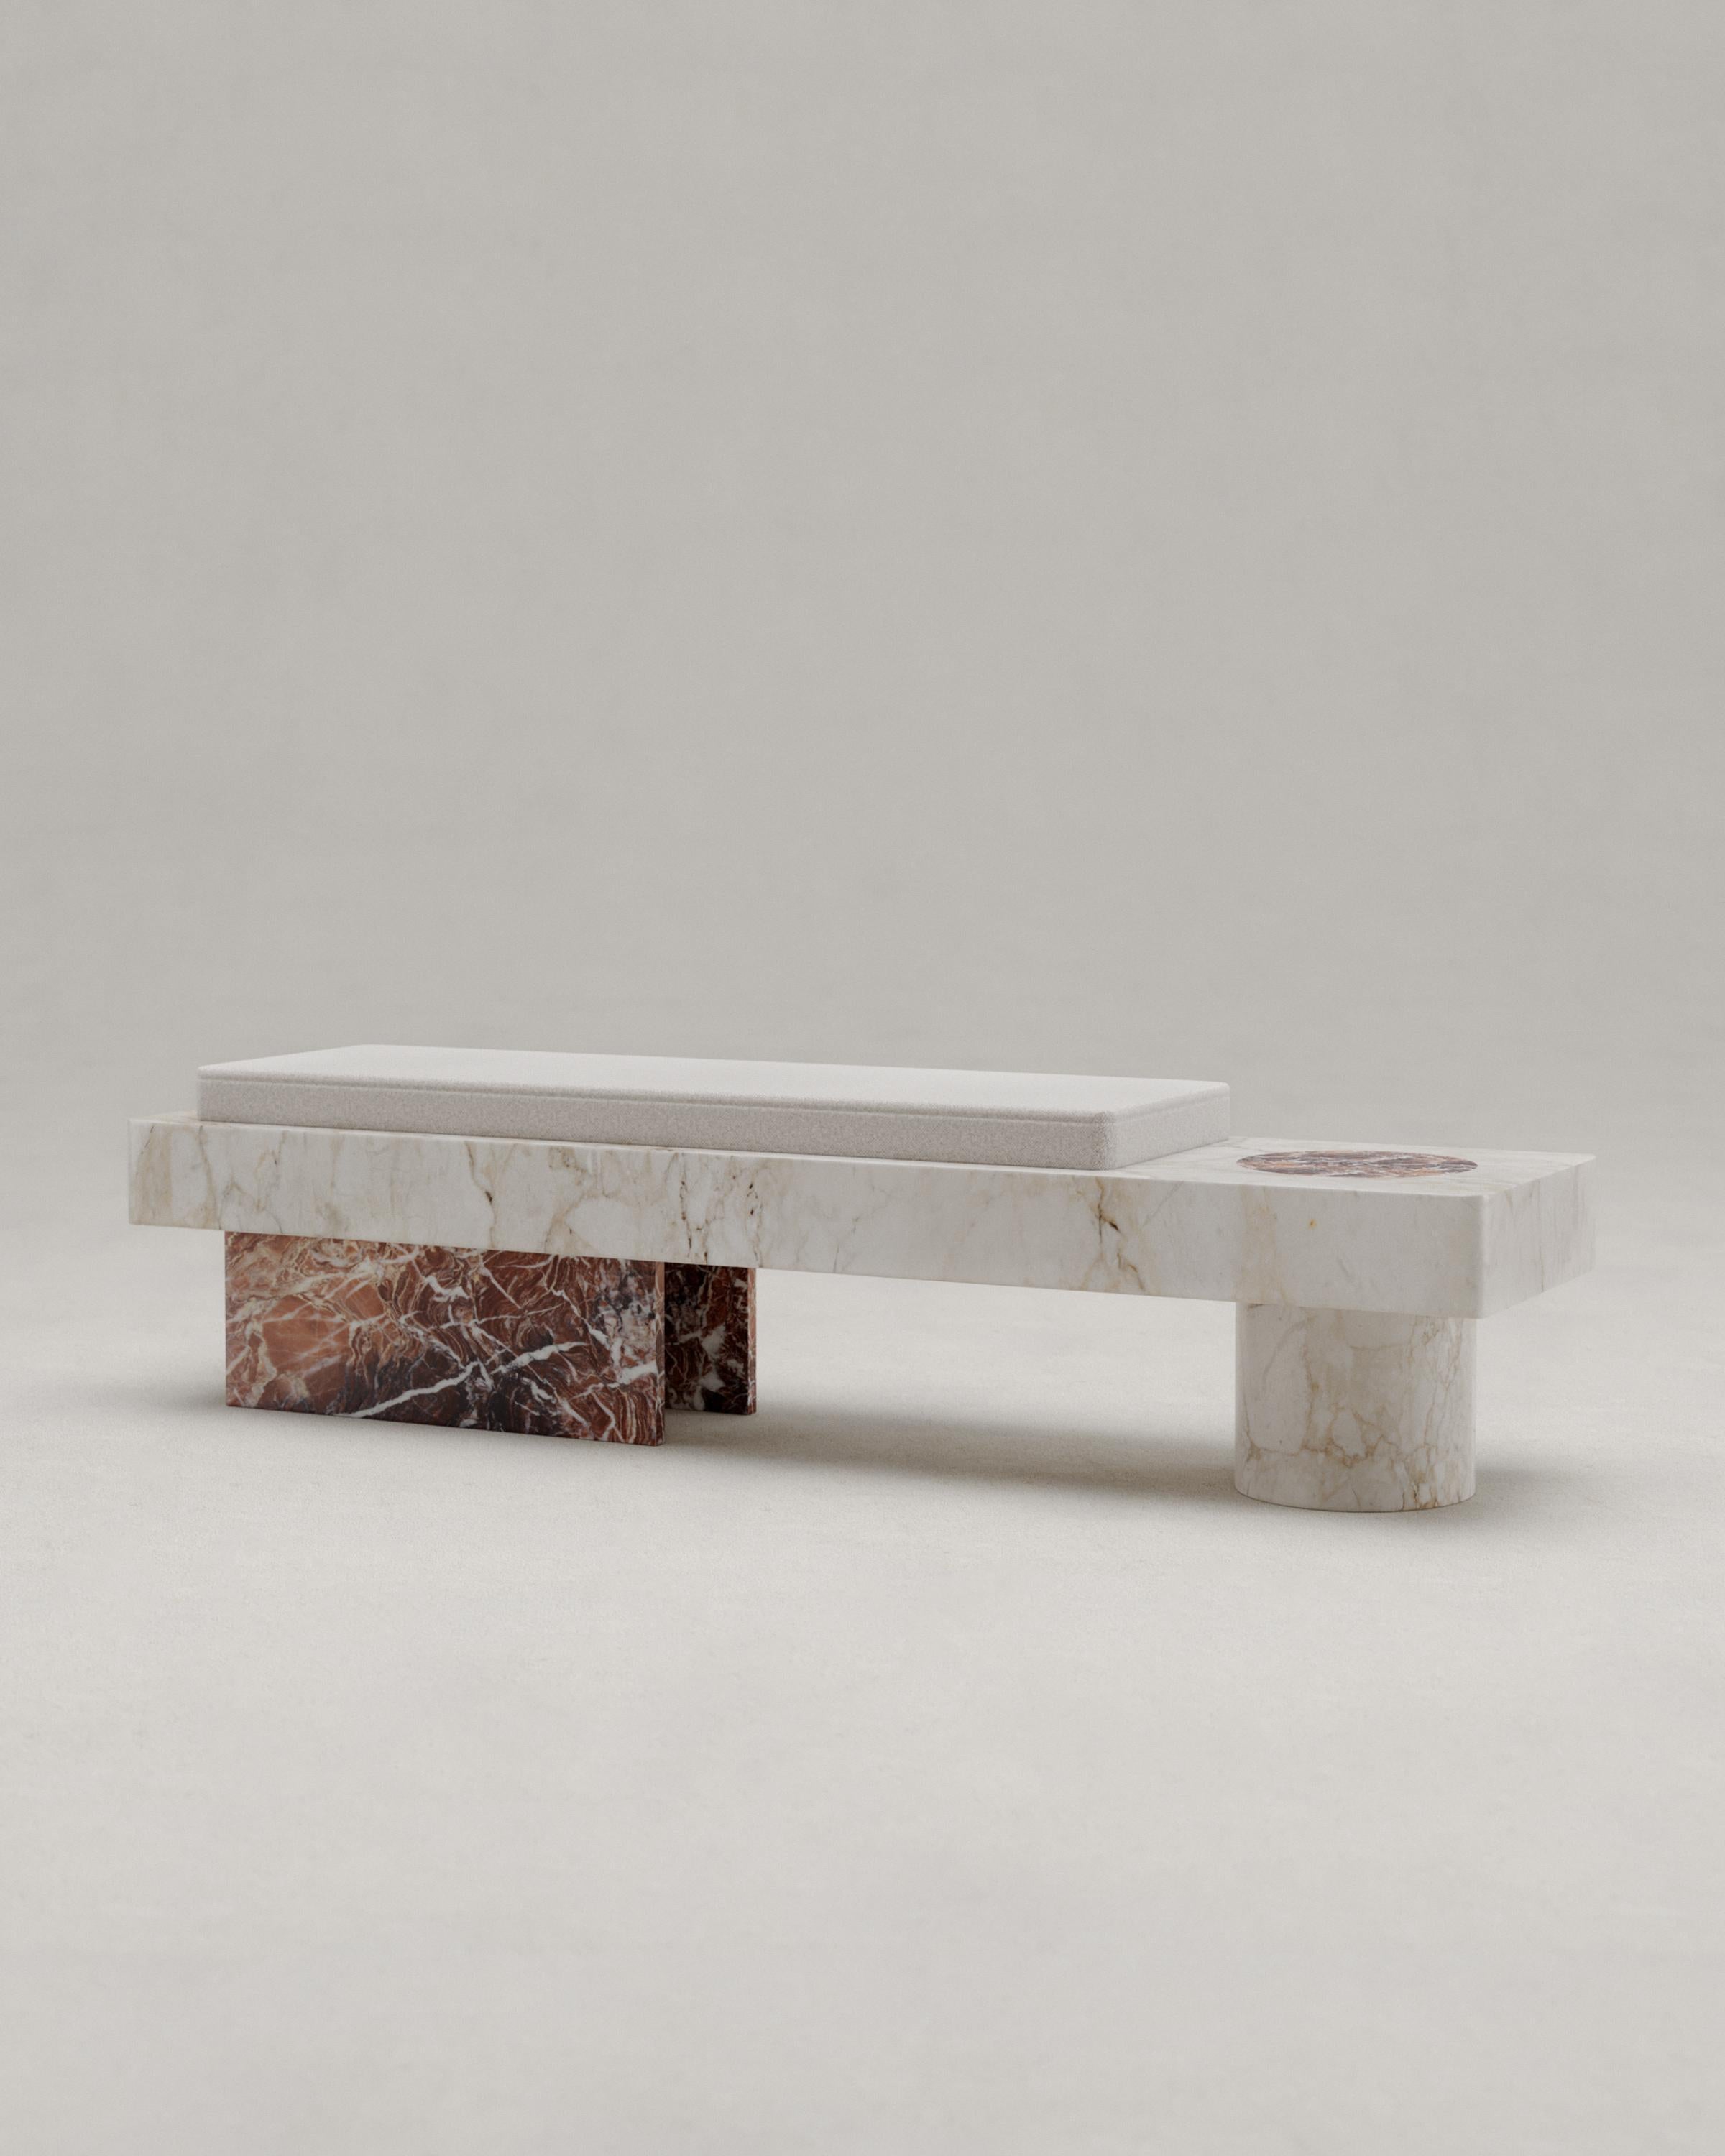 Salvante BS1 bench by Piotr Dabrowa
Unique Piece
Dimensions: W 160 x D 40 x H 40 cm
Materials: Calacatta marble, Rosa Peralba marble.
Also available: Calacatta Viola marble, walnut burl.

Salvante collection is a play between shapes, materials &